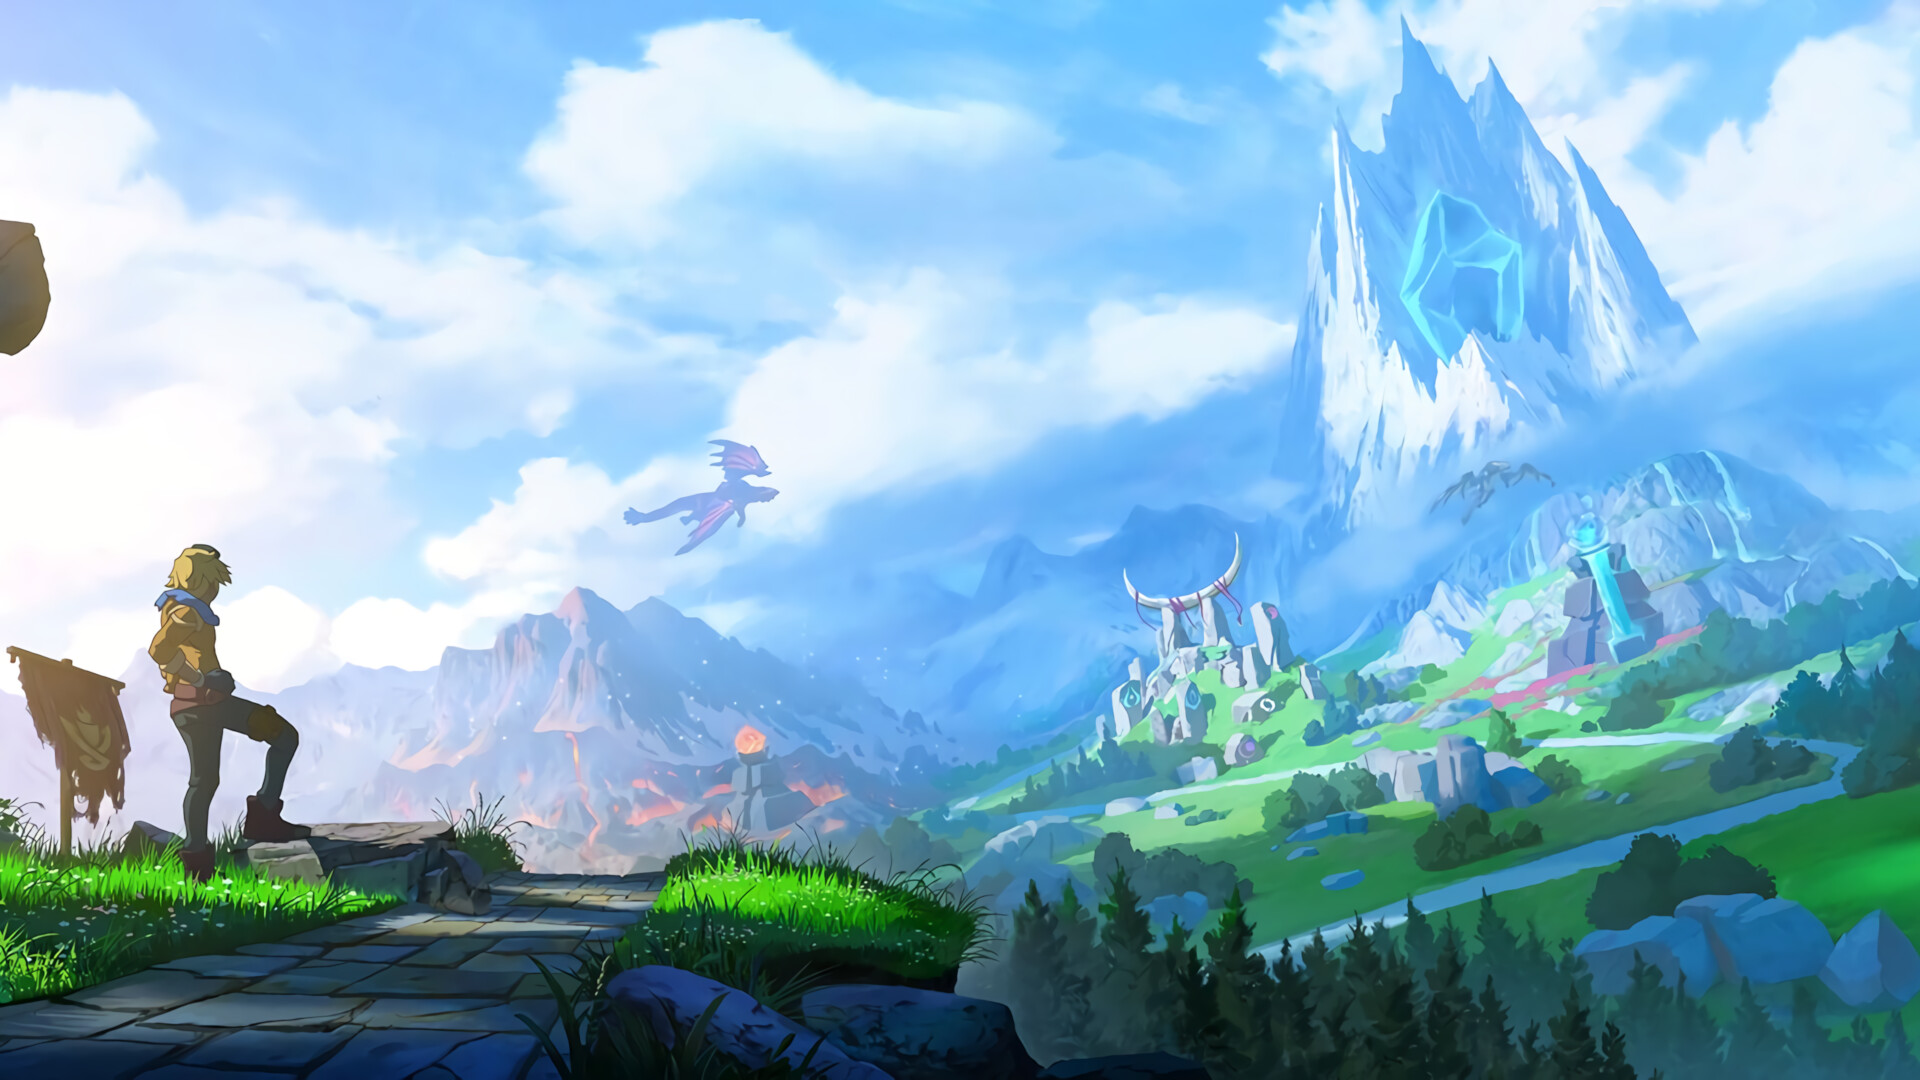 League of Legends: Summoner's Rift is the most prominent game mode in professional-level play. 1920x1080 Full HD Background.